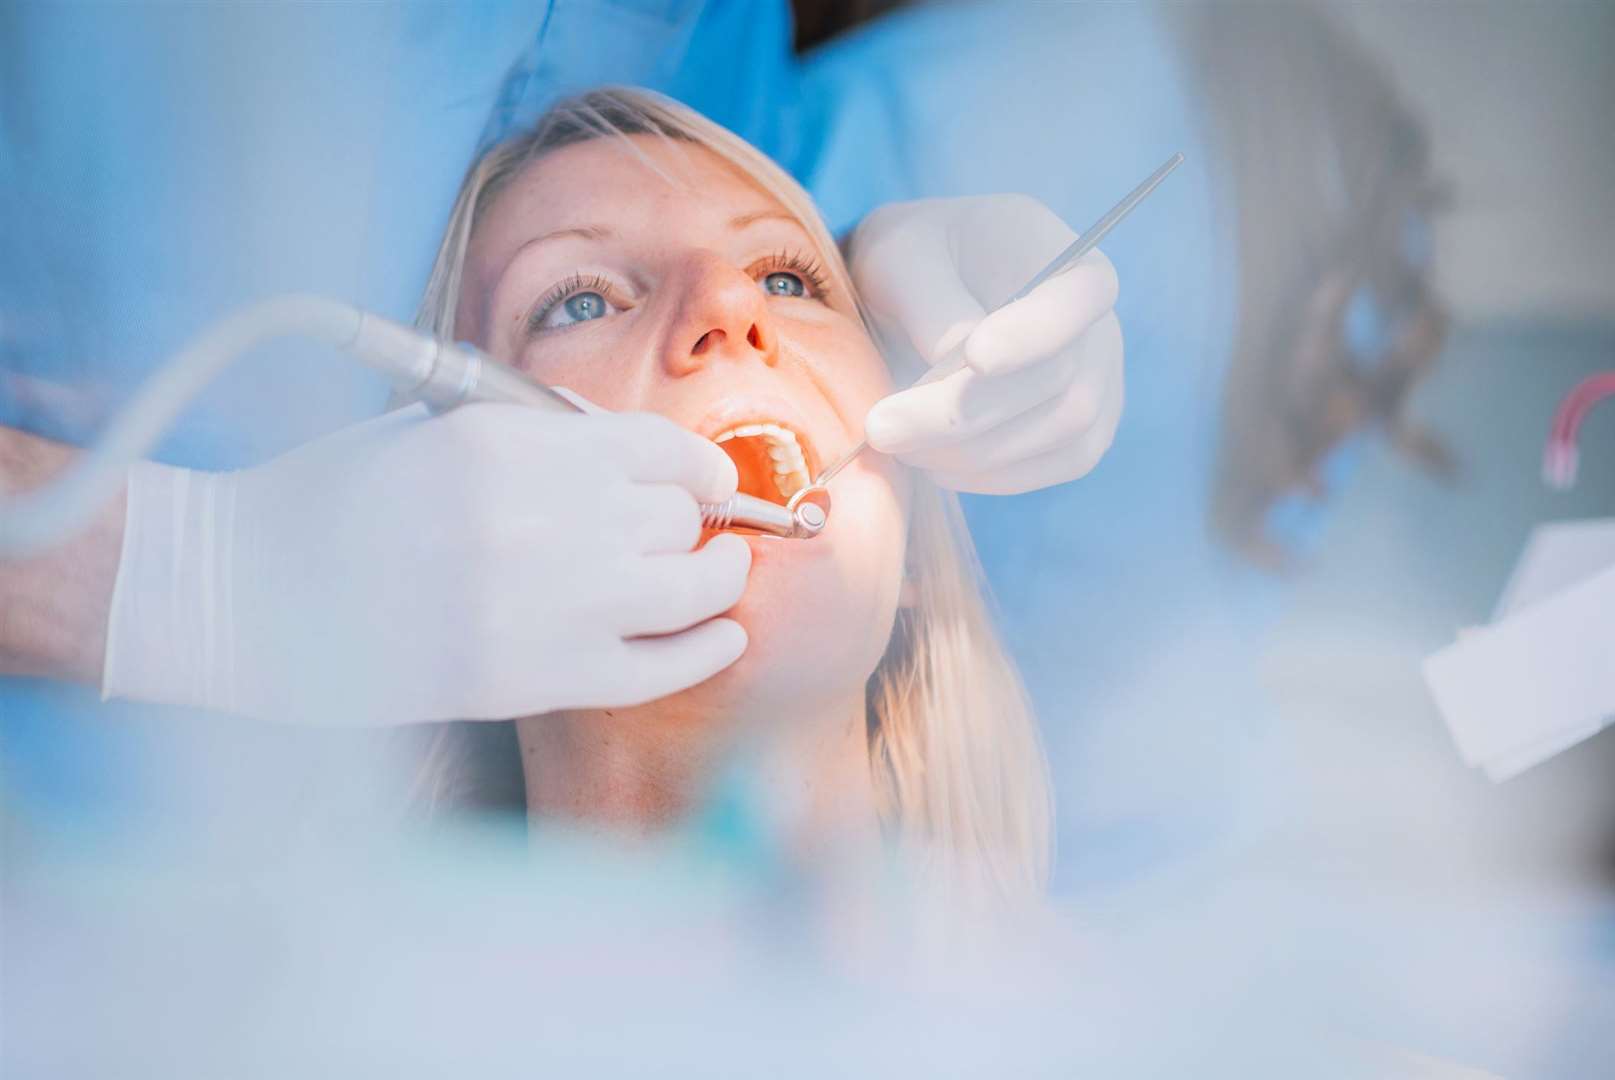 The plan should help one million more patients see a dentist. Image: iStock.